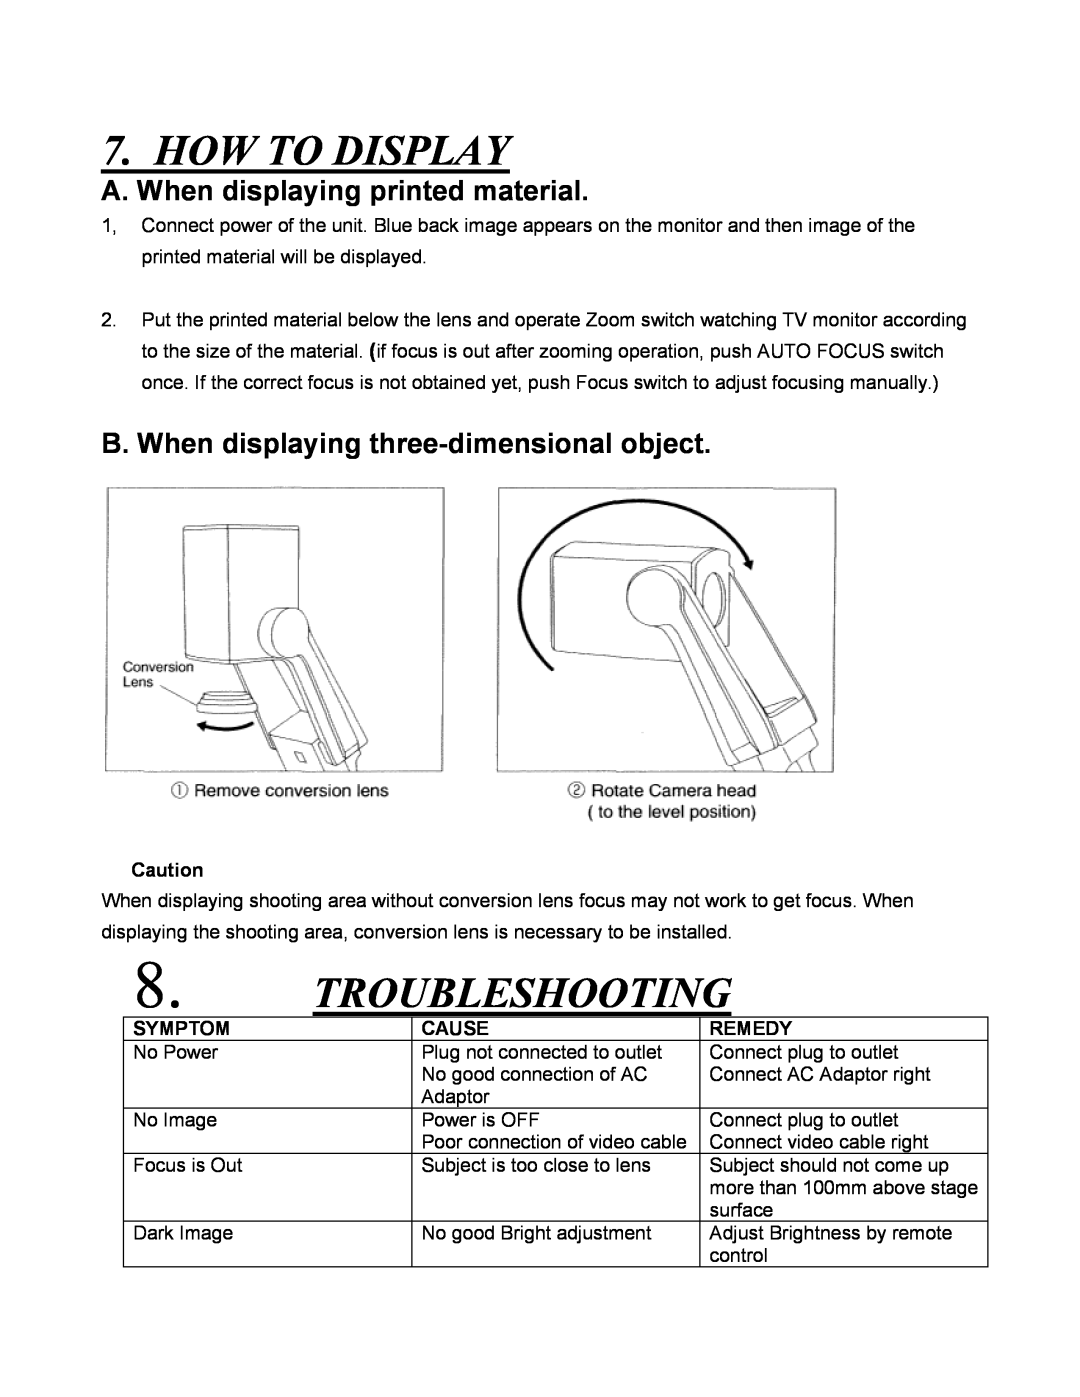 Eiki V-2500 instruction manual How To Display, Troubleshooting, A. When displaying printed material, Symptom, Cause, Remedy 